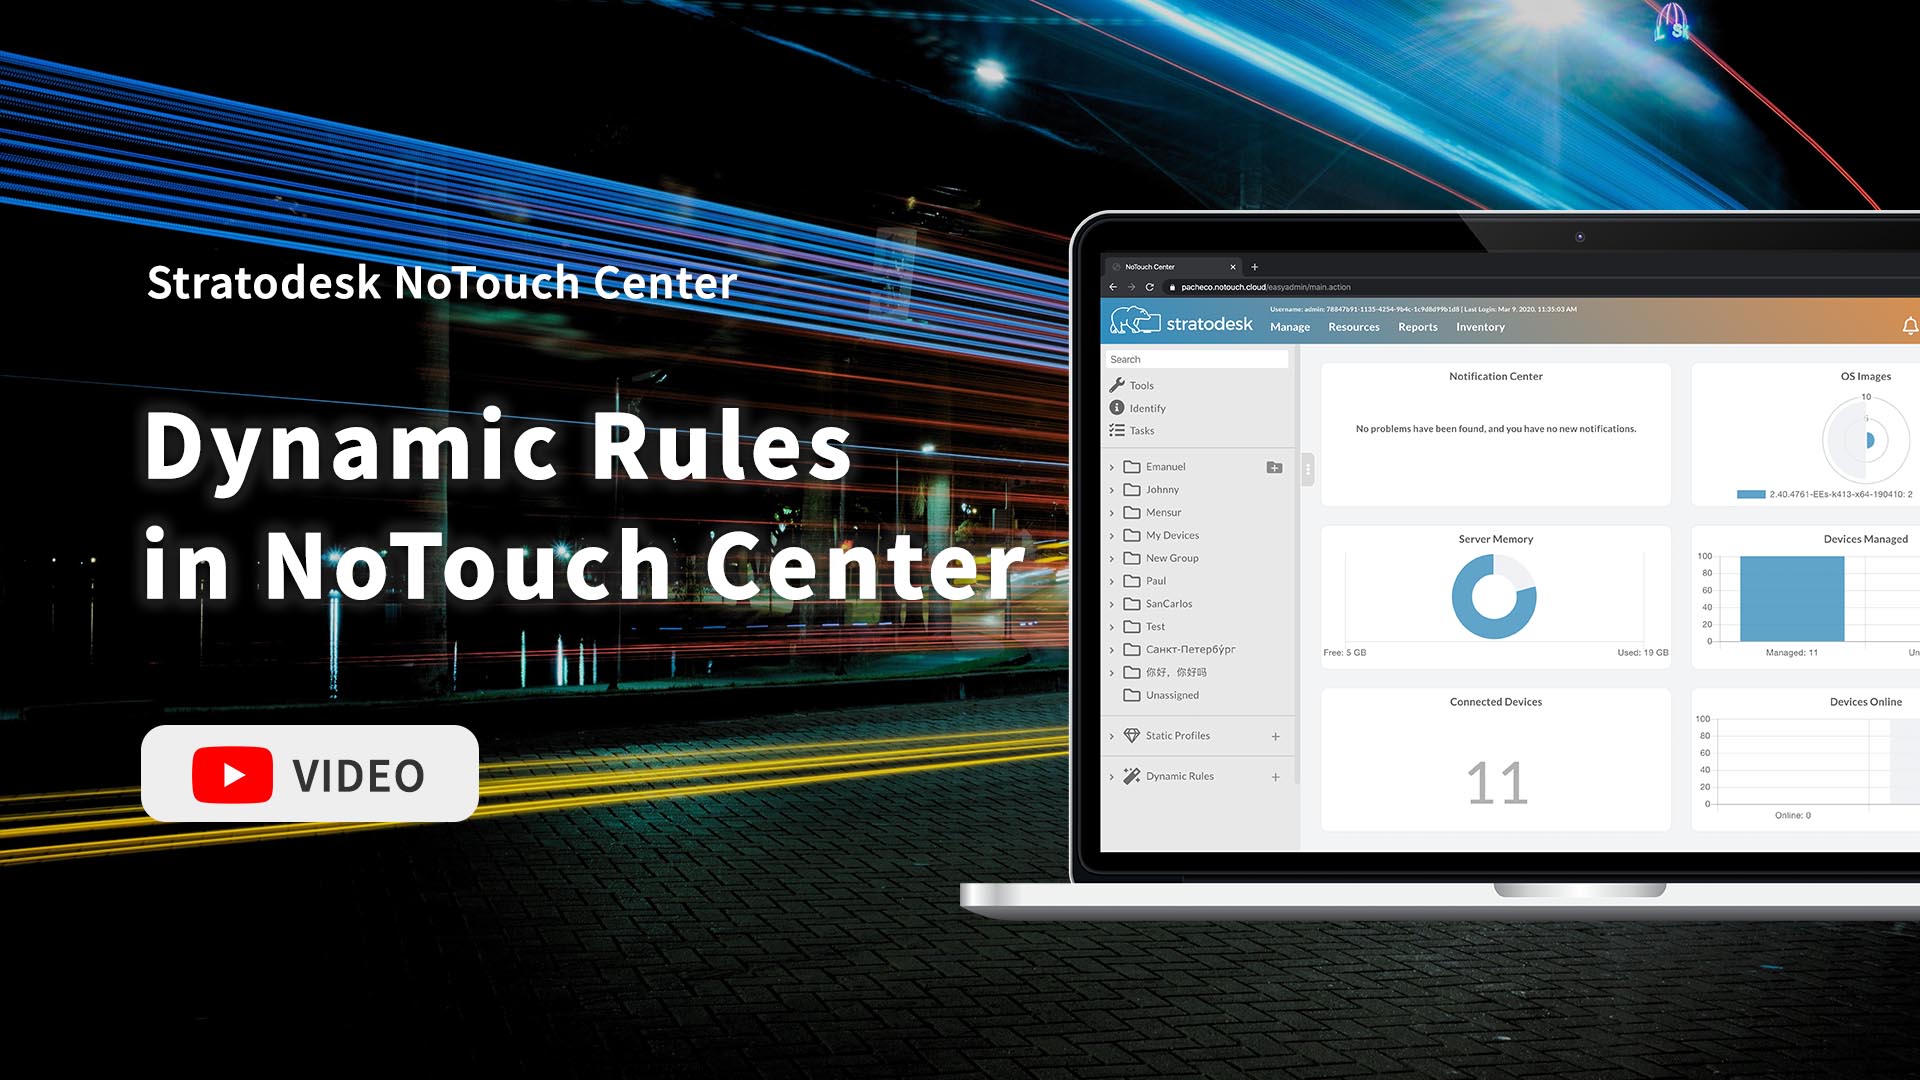 Dynamic Rules in Stratodesk NoTouch Center